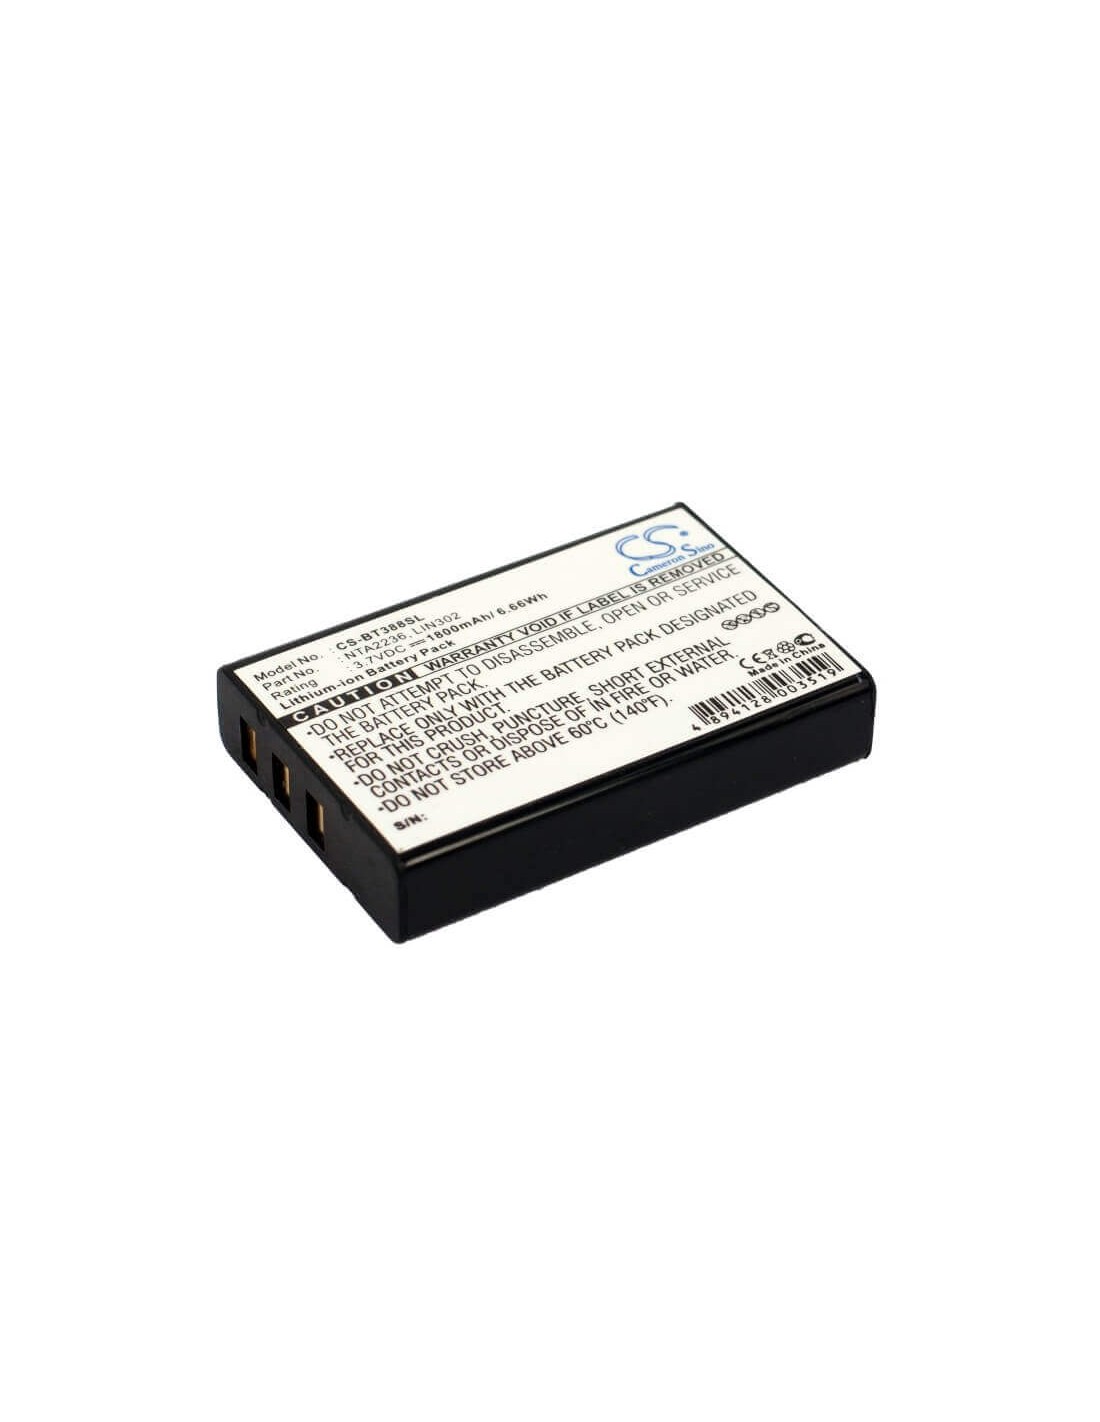 Battery for Oncourse Sirf Star Iii 3.7V, 1800mAh - 6.66Wh